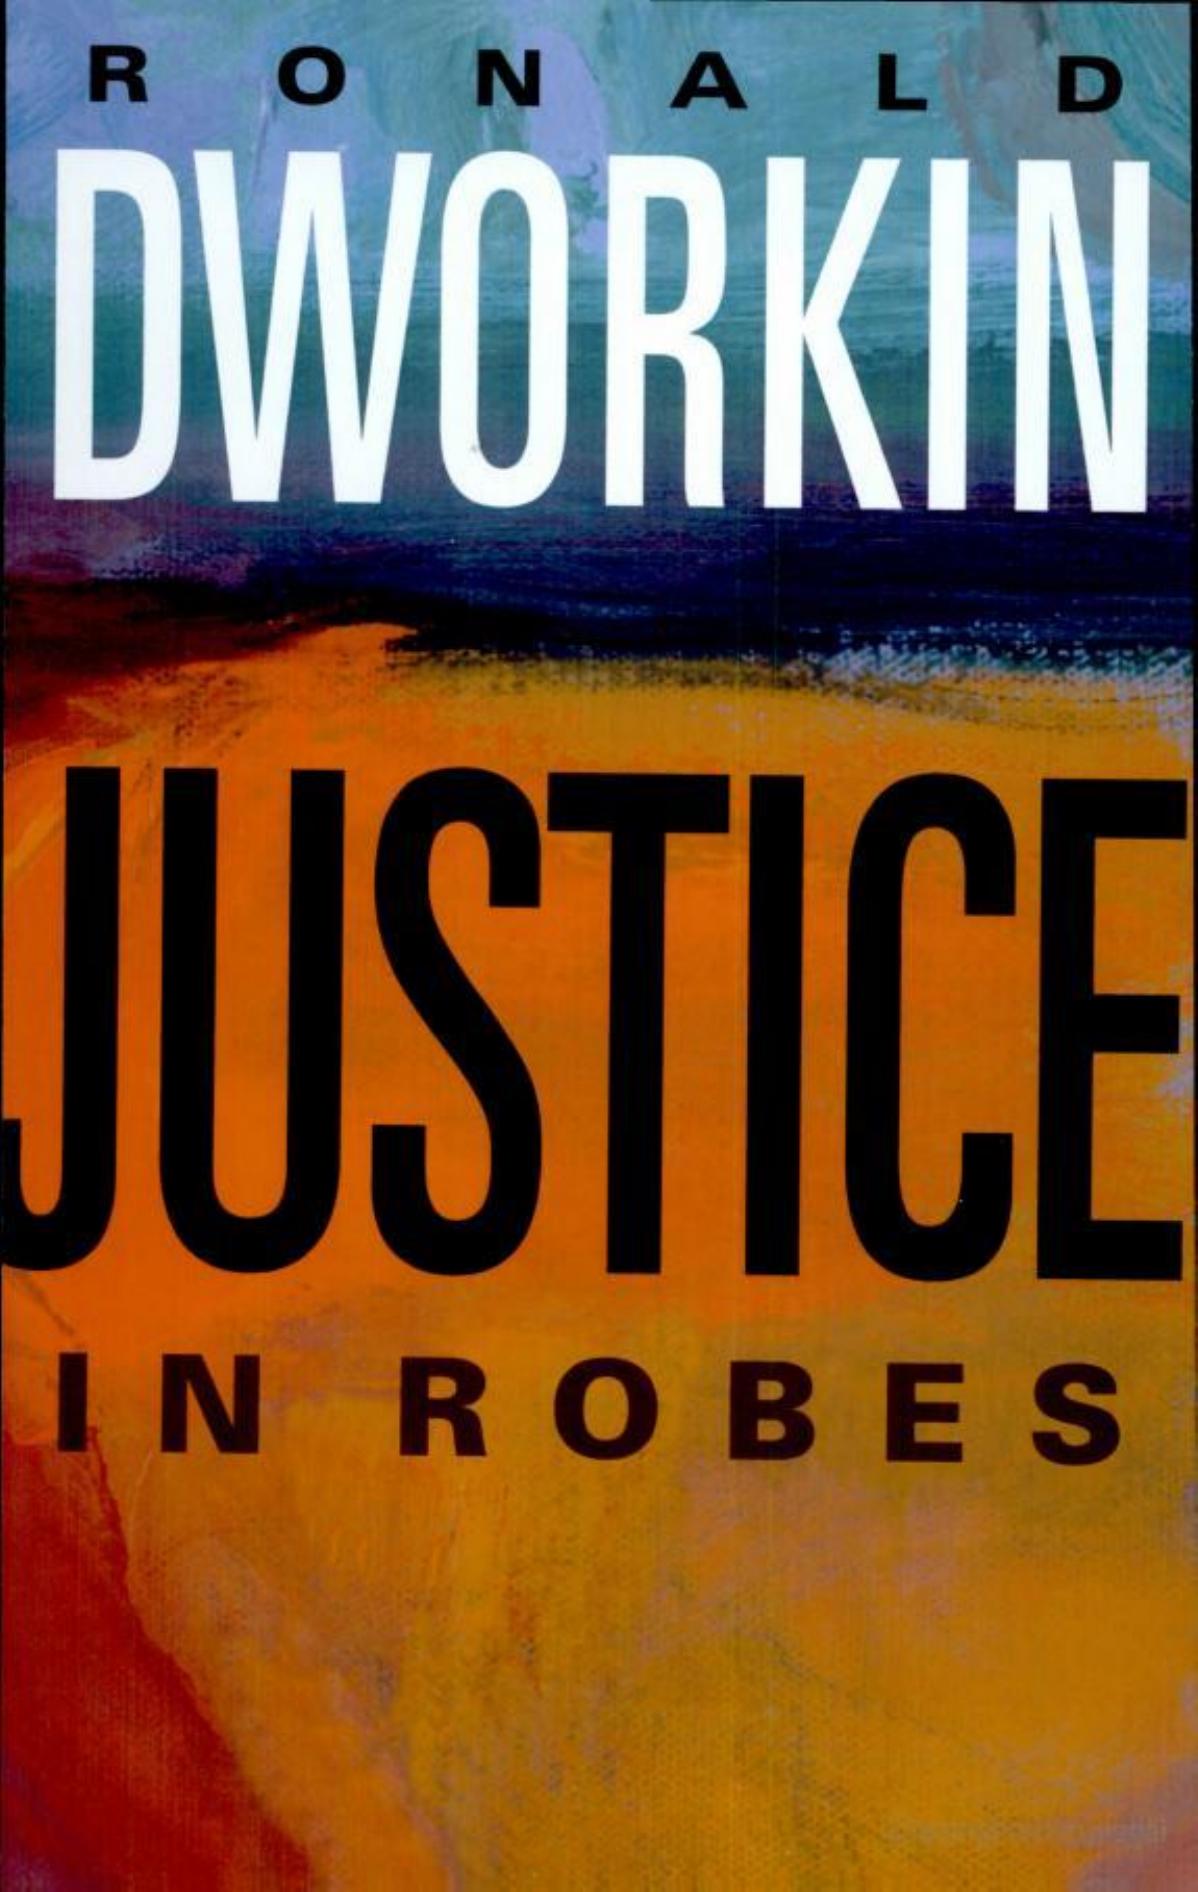 Justice in robes by By Ronald Dworkin